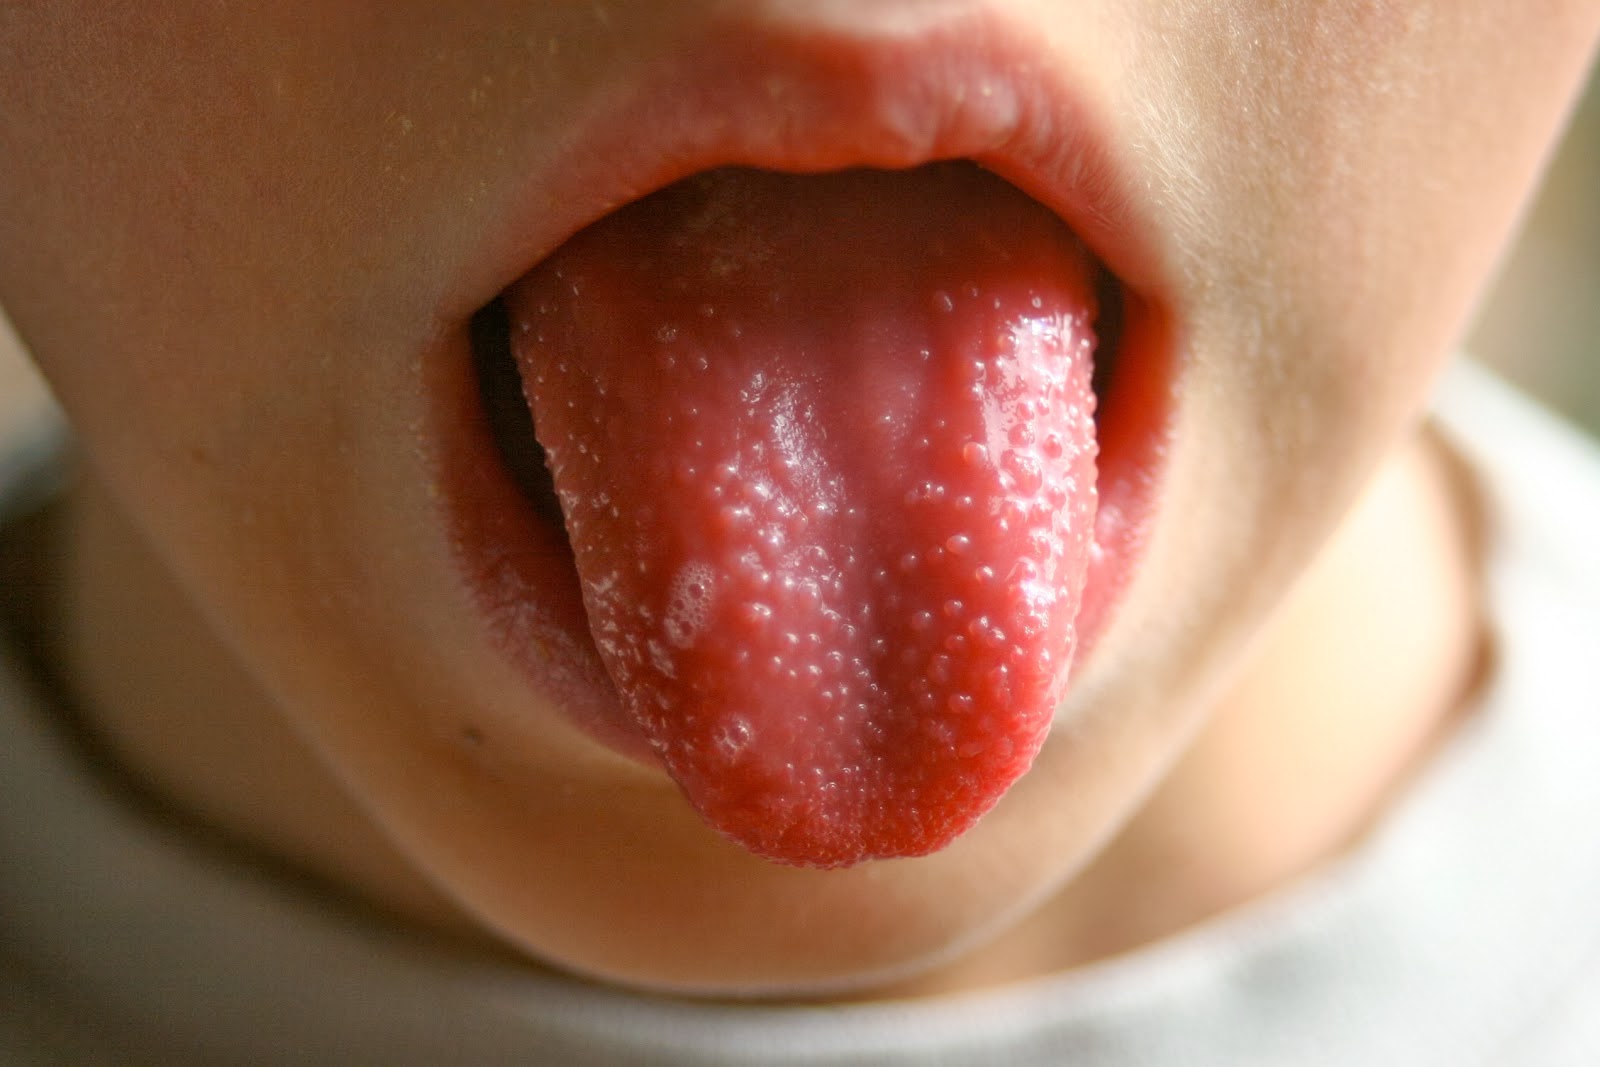 Rough Swollen Tongue Typical Of Scarlet Fever